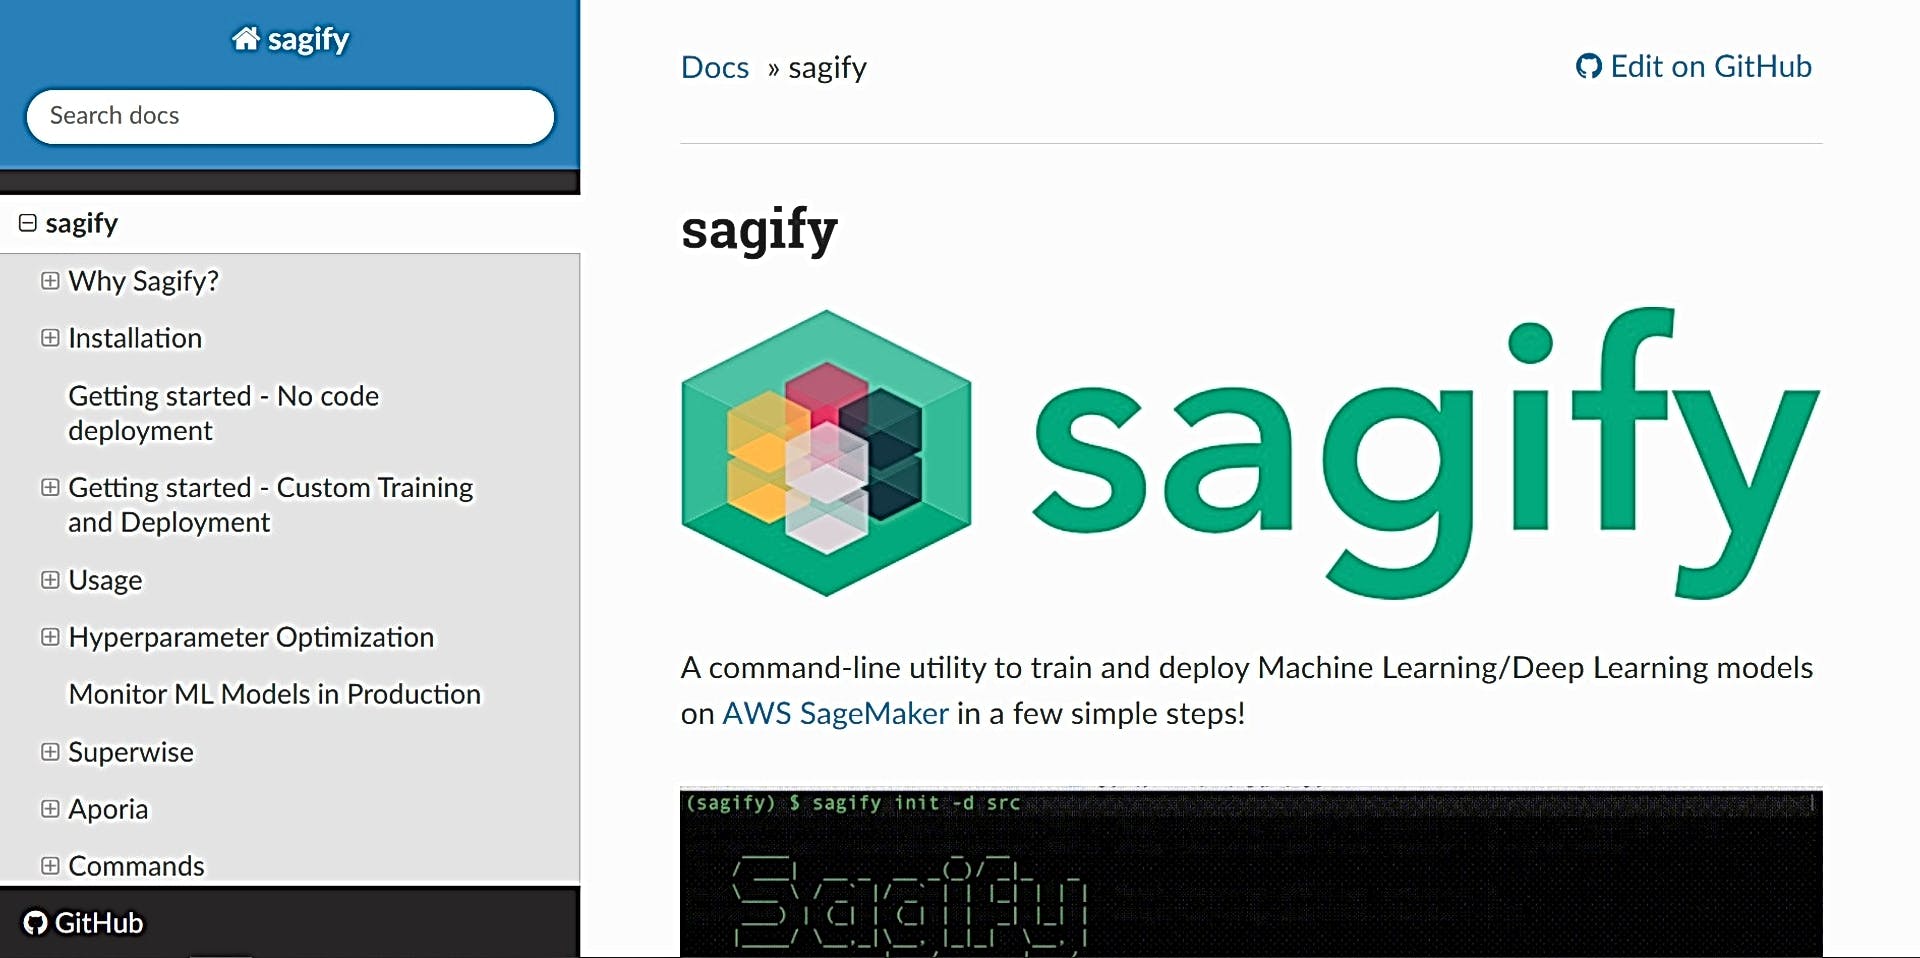 Sagify featured